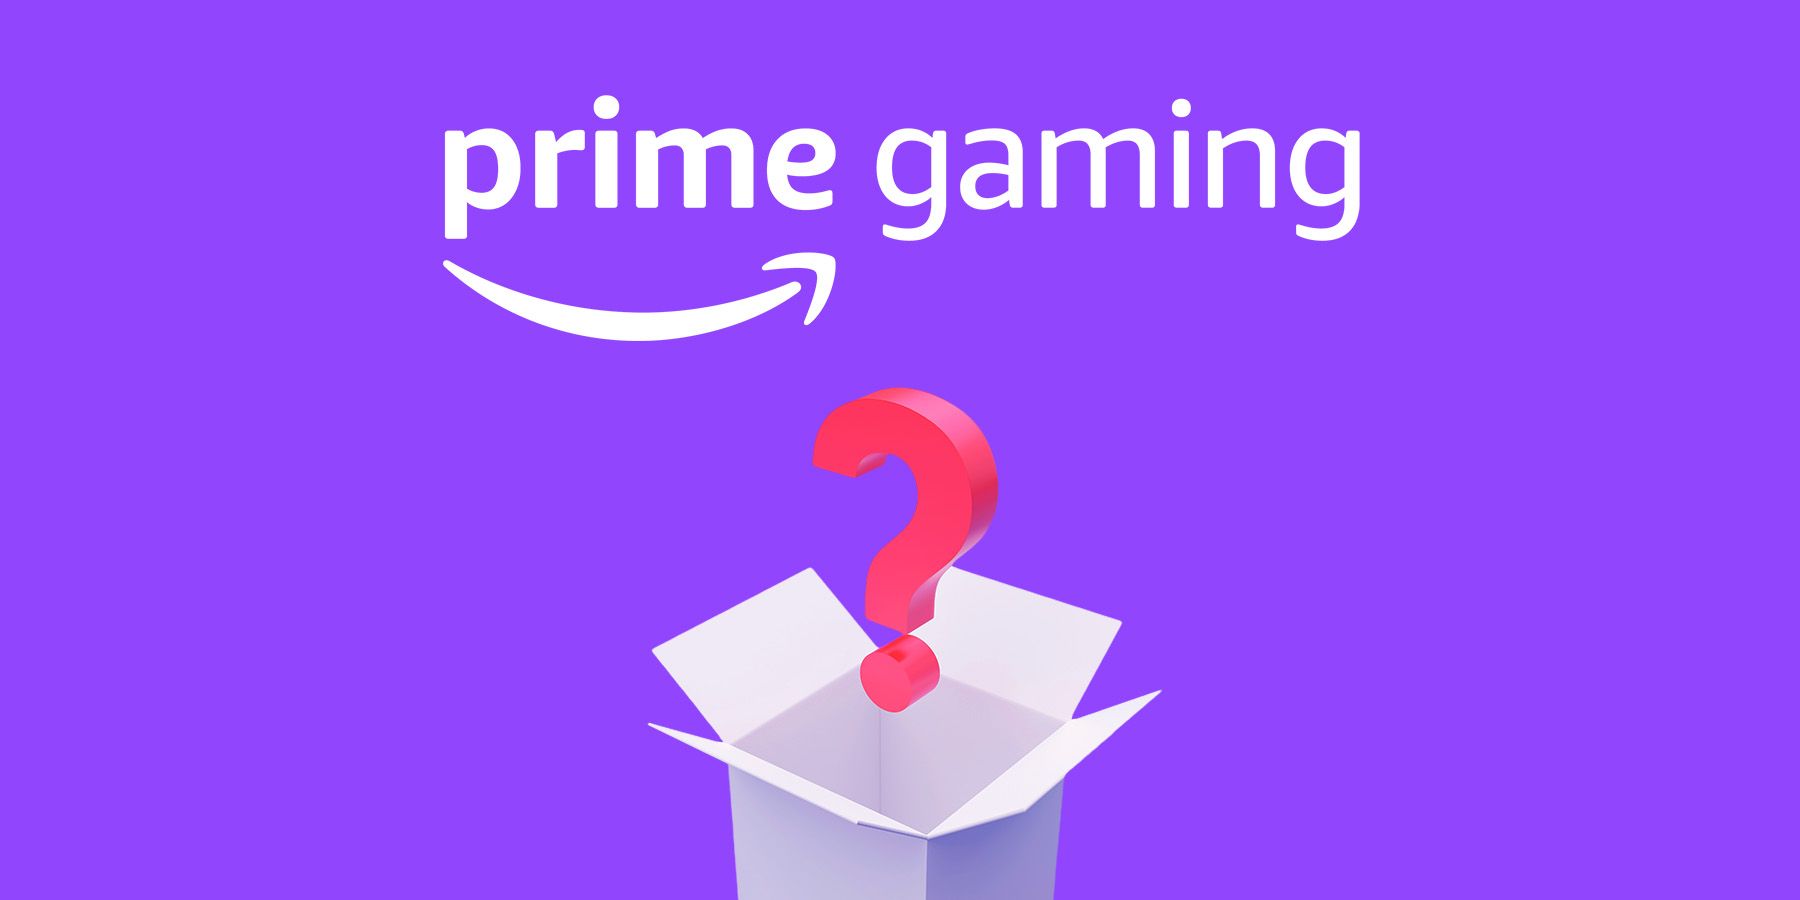 Prime Gaming is offering 13 free games for June 2023